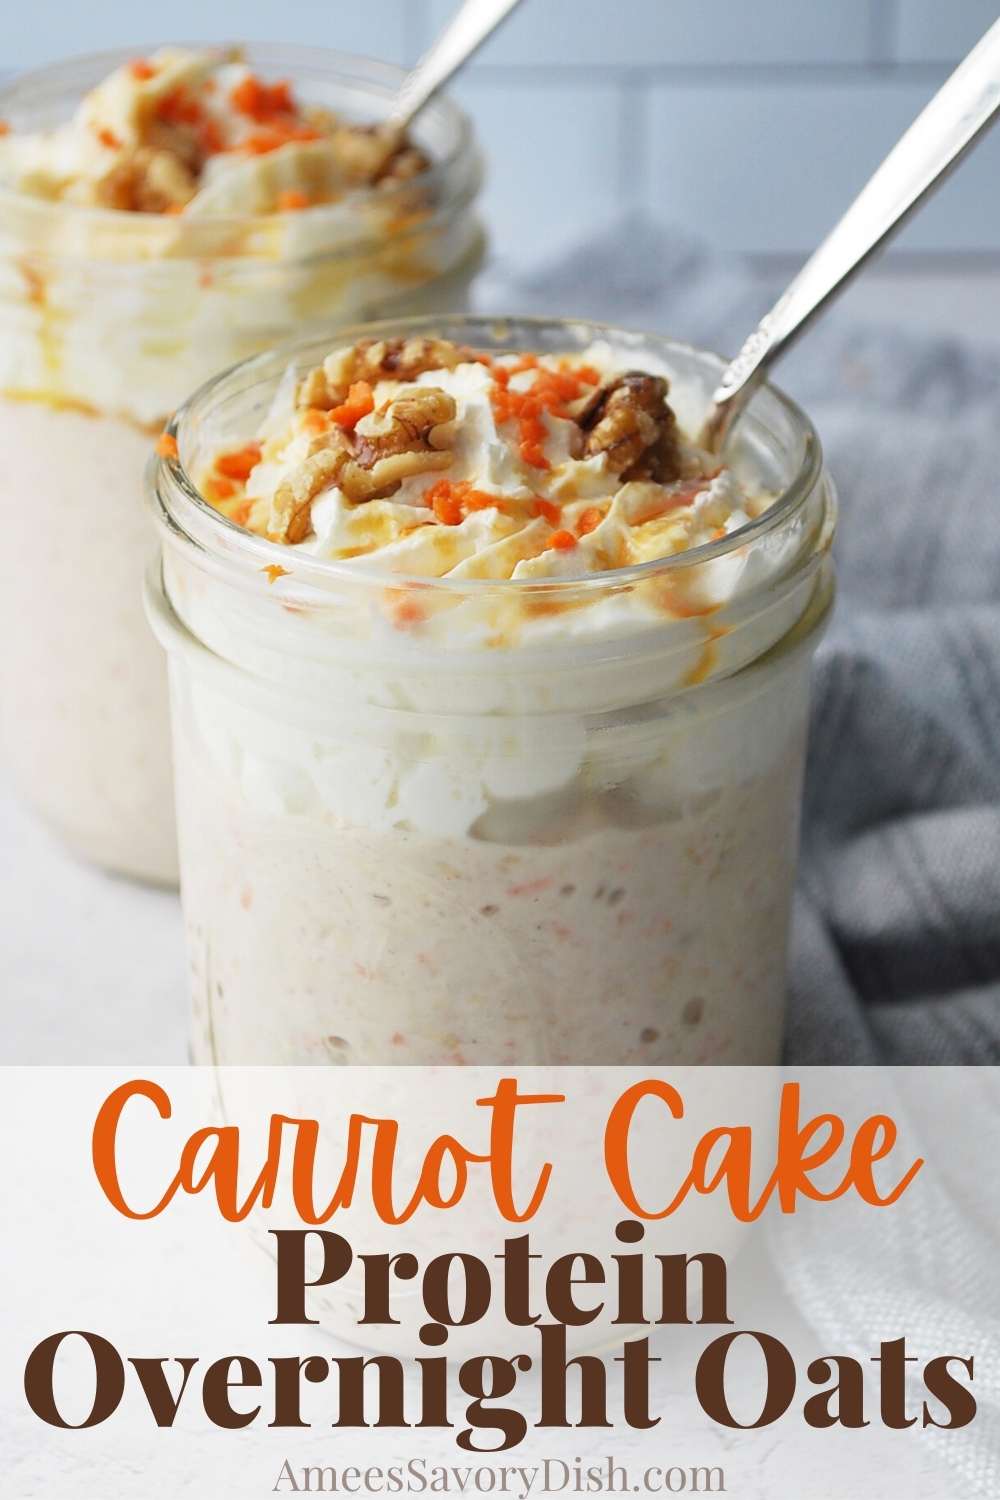 An easy recipe for high protein overnight oats with two options for making with Greek yogurt or protein powder with a variety of toppings including carrot-cake-inspired ingredients. via @Ameessavorydish